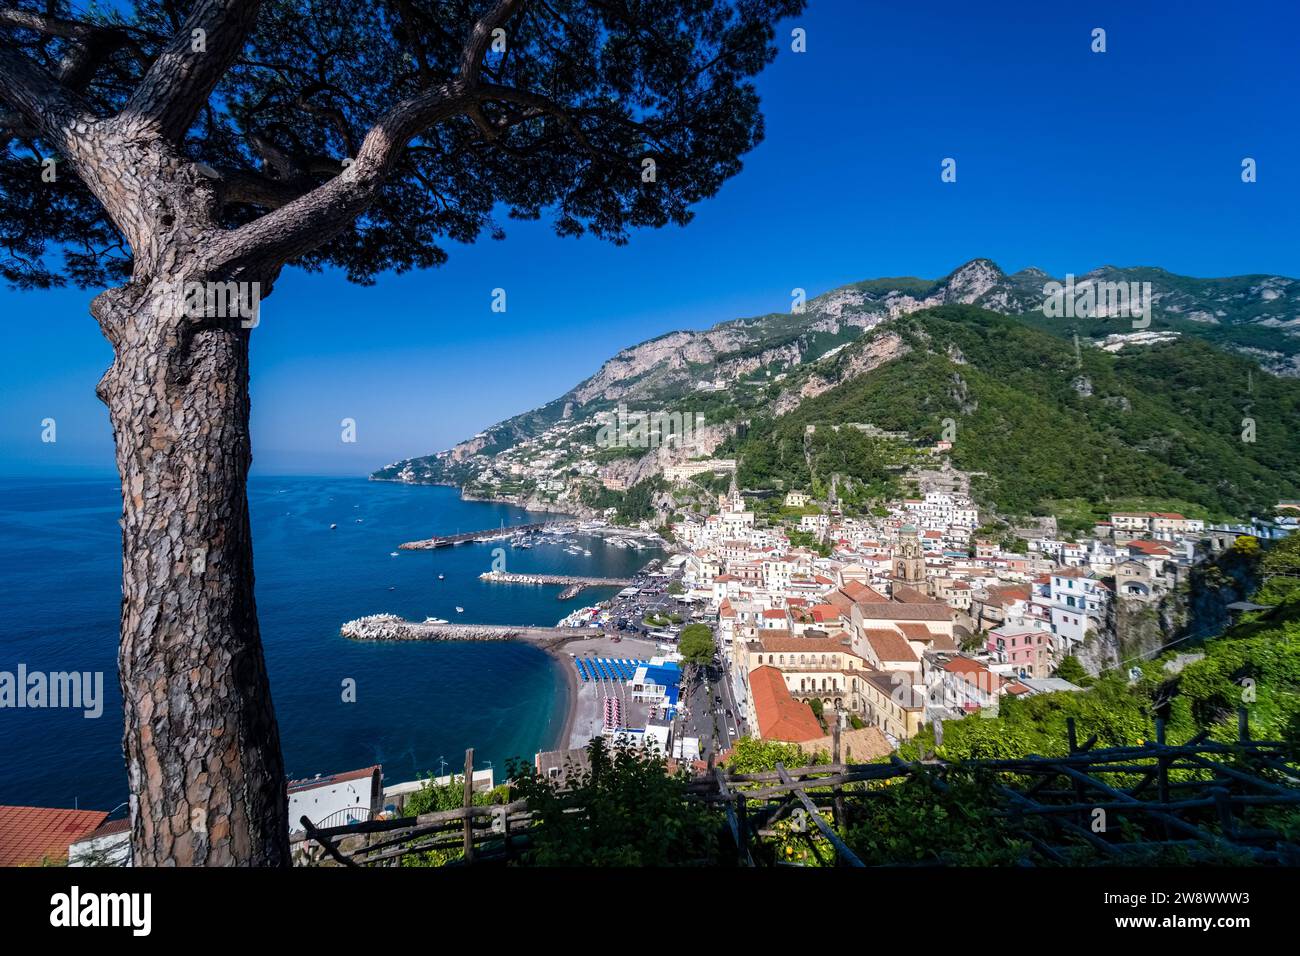 Aerial view of the town of Amalfi on the Amalfi Coast, which lies on the coast in a valley leading to the Mediterranean Sea. Stock Photo